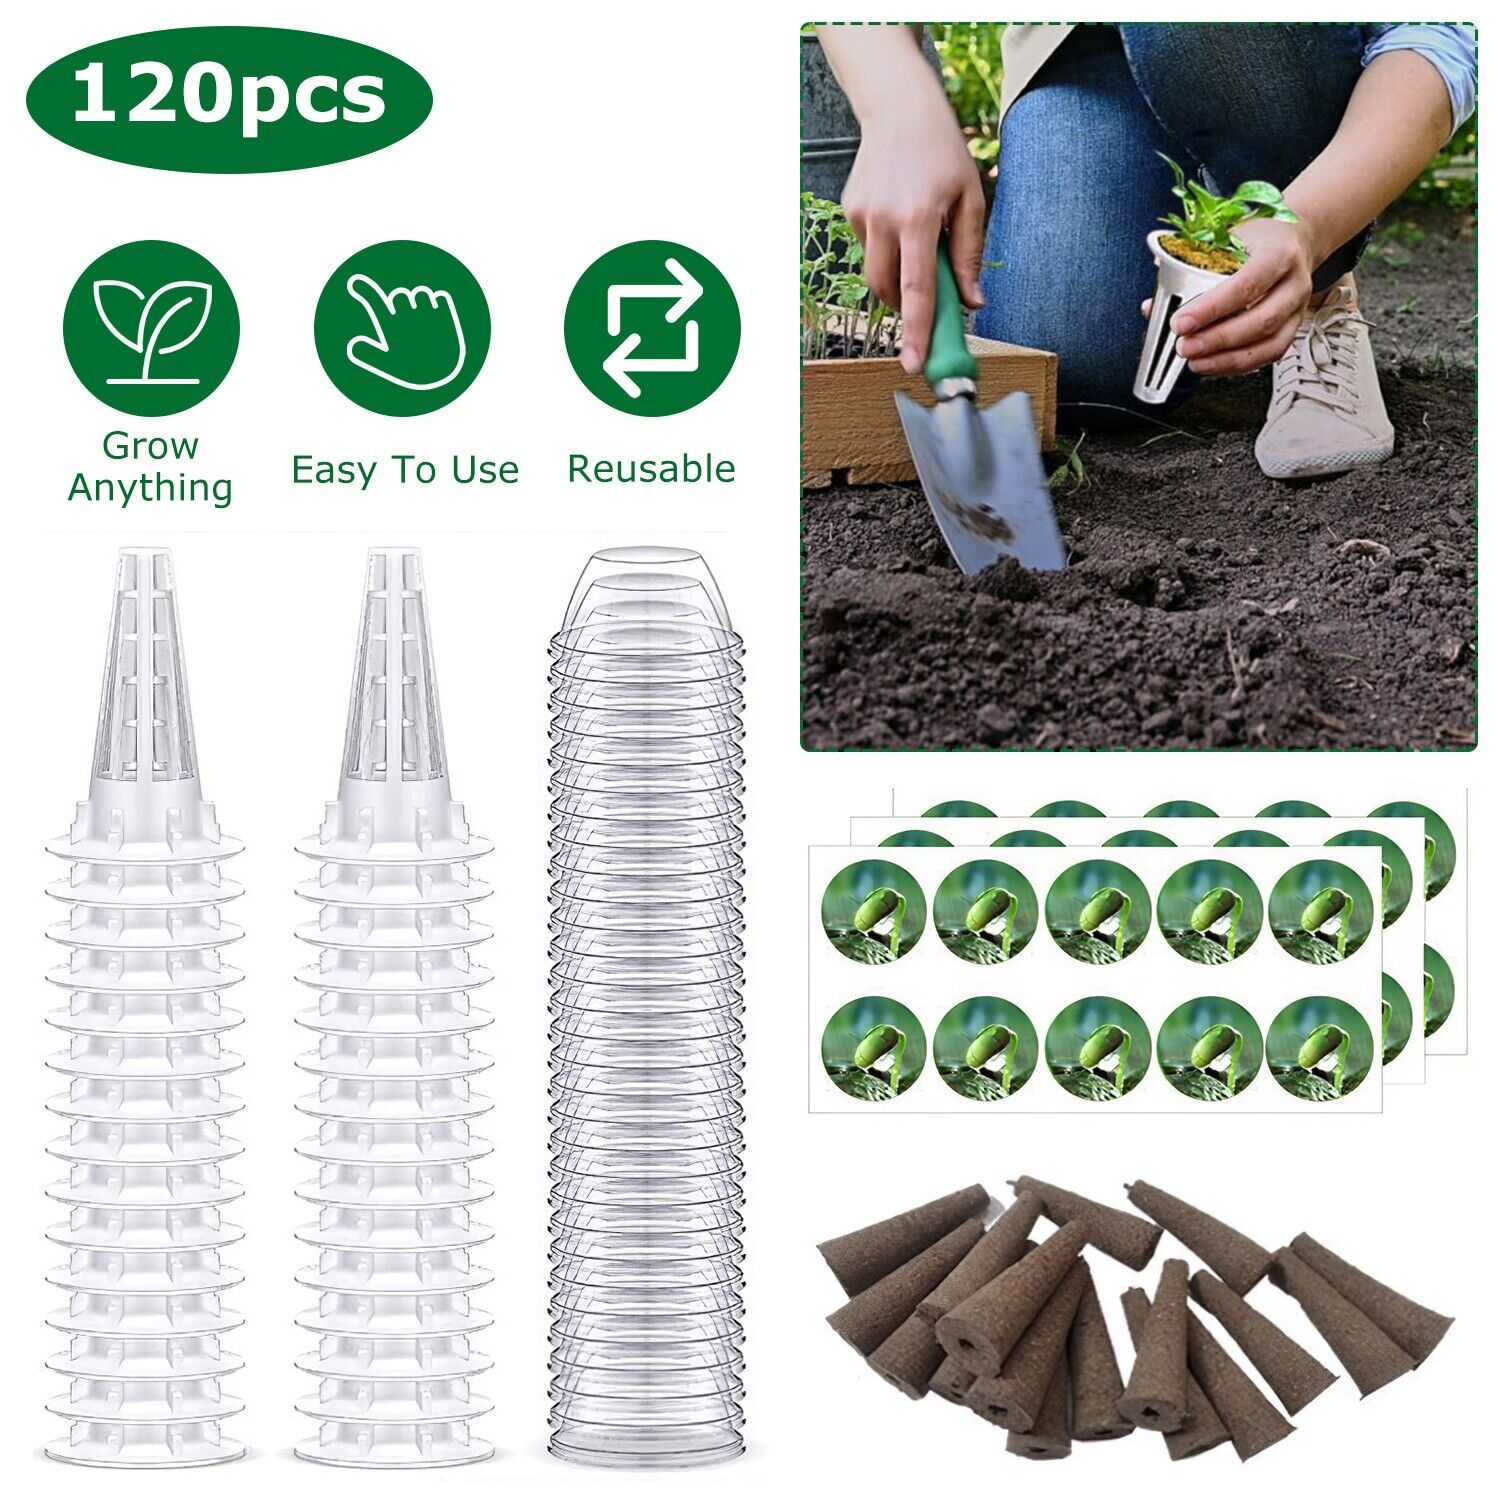 120 Pcs Seed Pods Kit Garden Growing Containers Hydroponics Garden Accessories